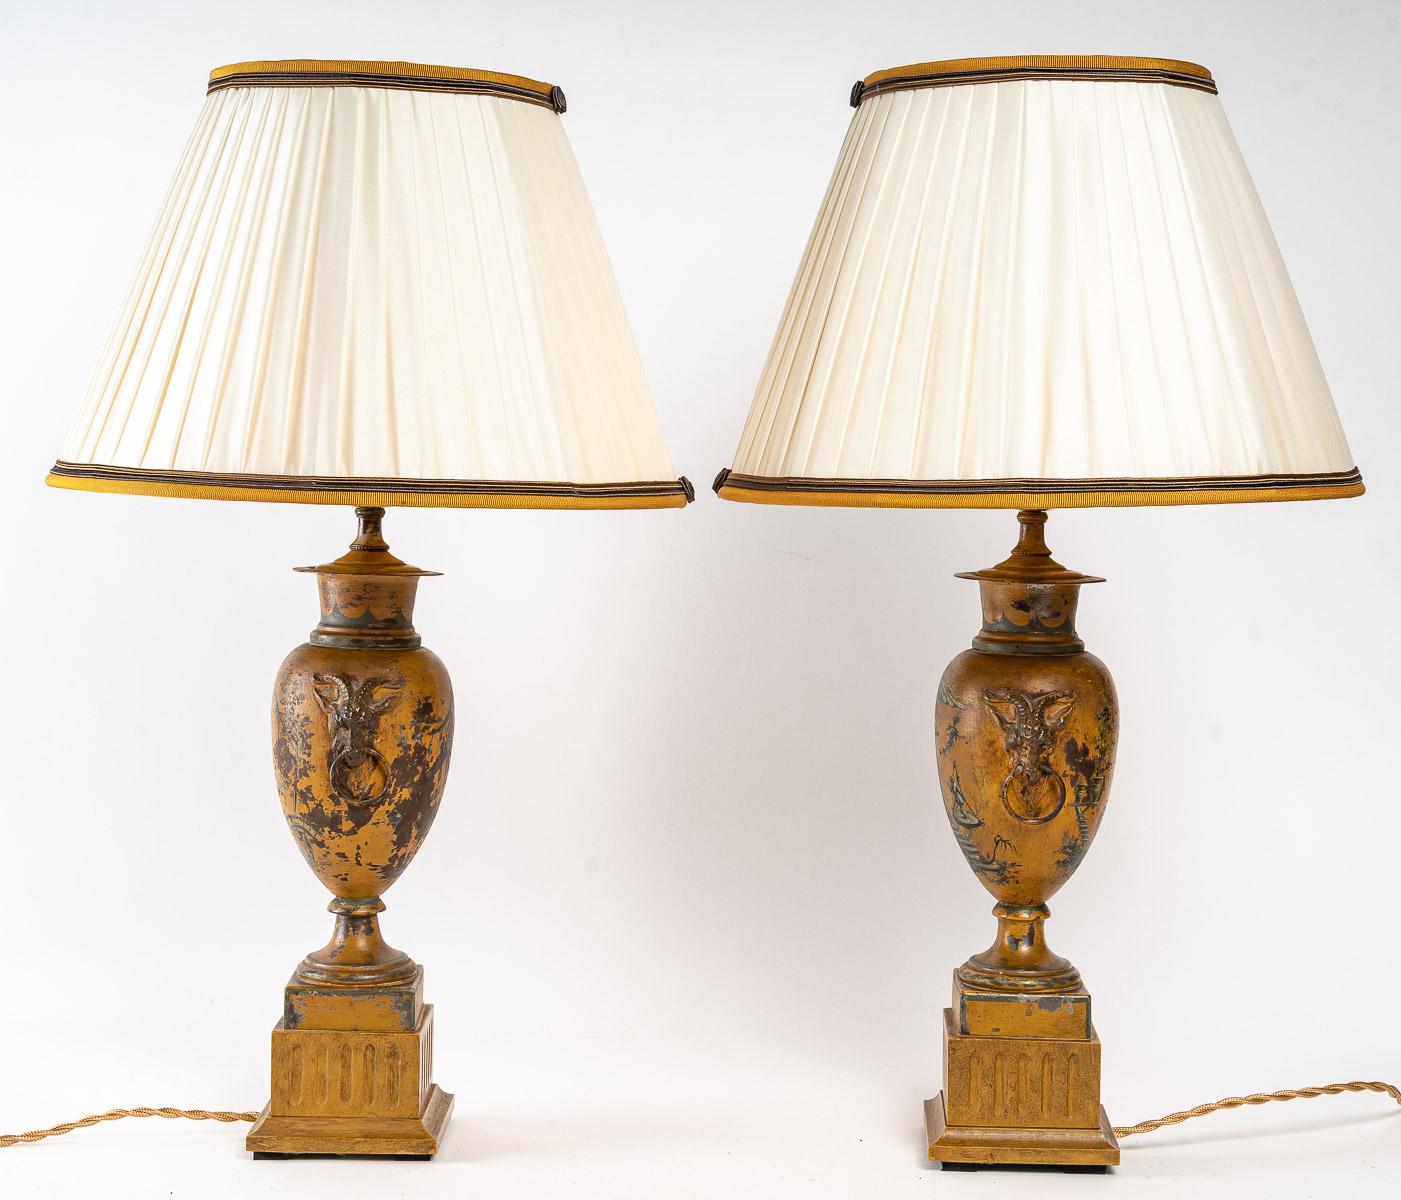 Pair of lamps in painted sheet metal, 19th century

Pair of lamps in painted sheet metal, 19th century, English work.

Measures: H: 58cm, D: 33 cm.